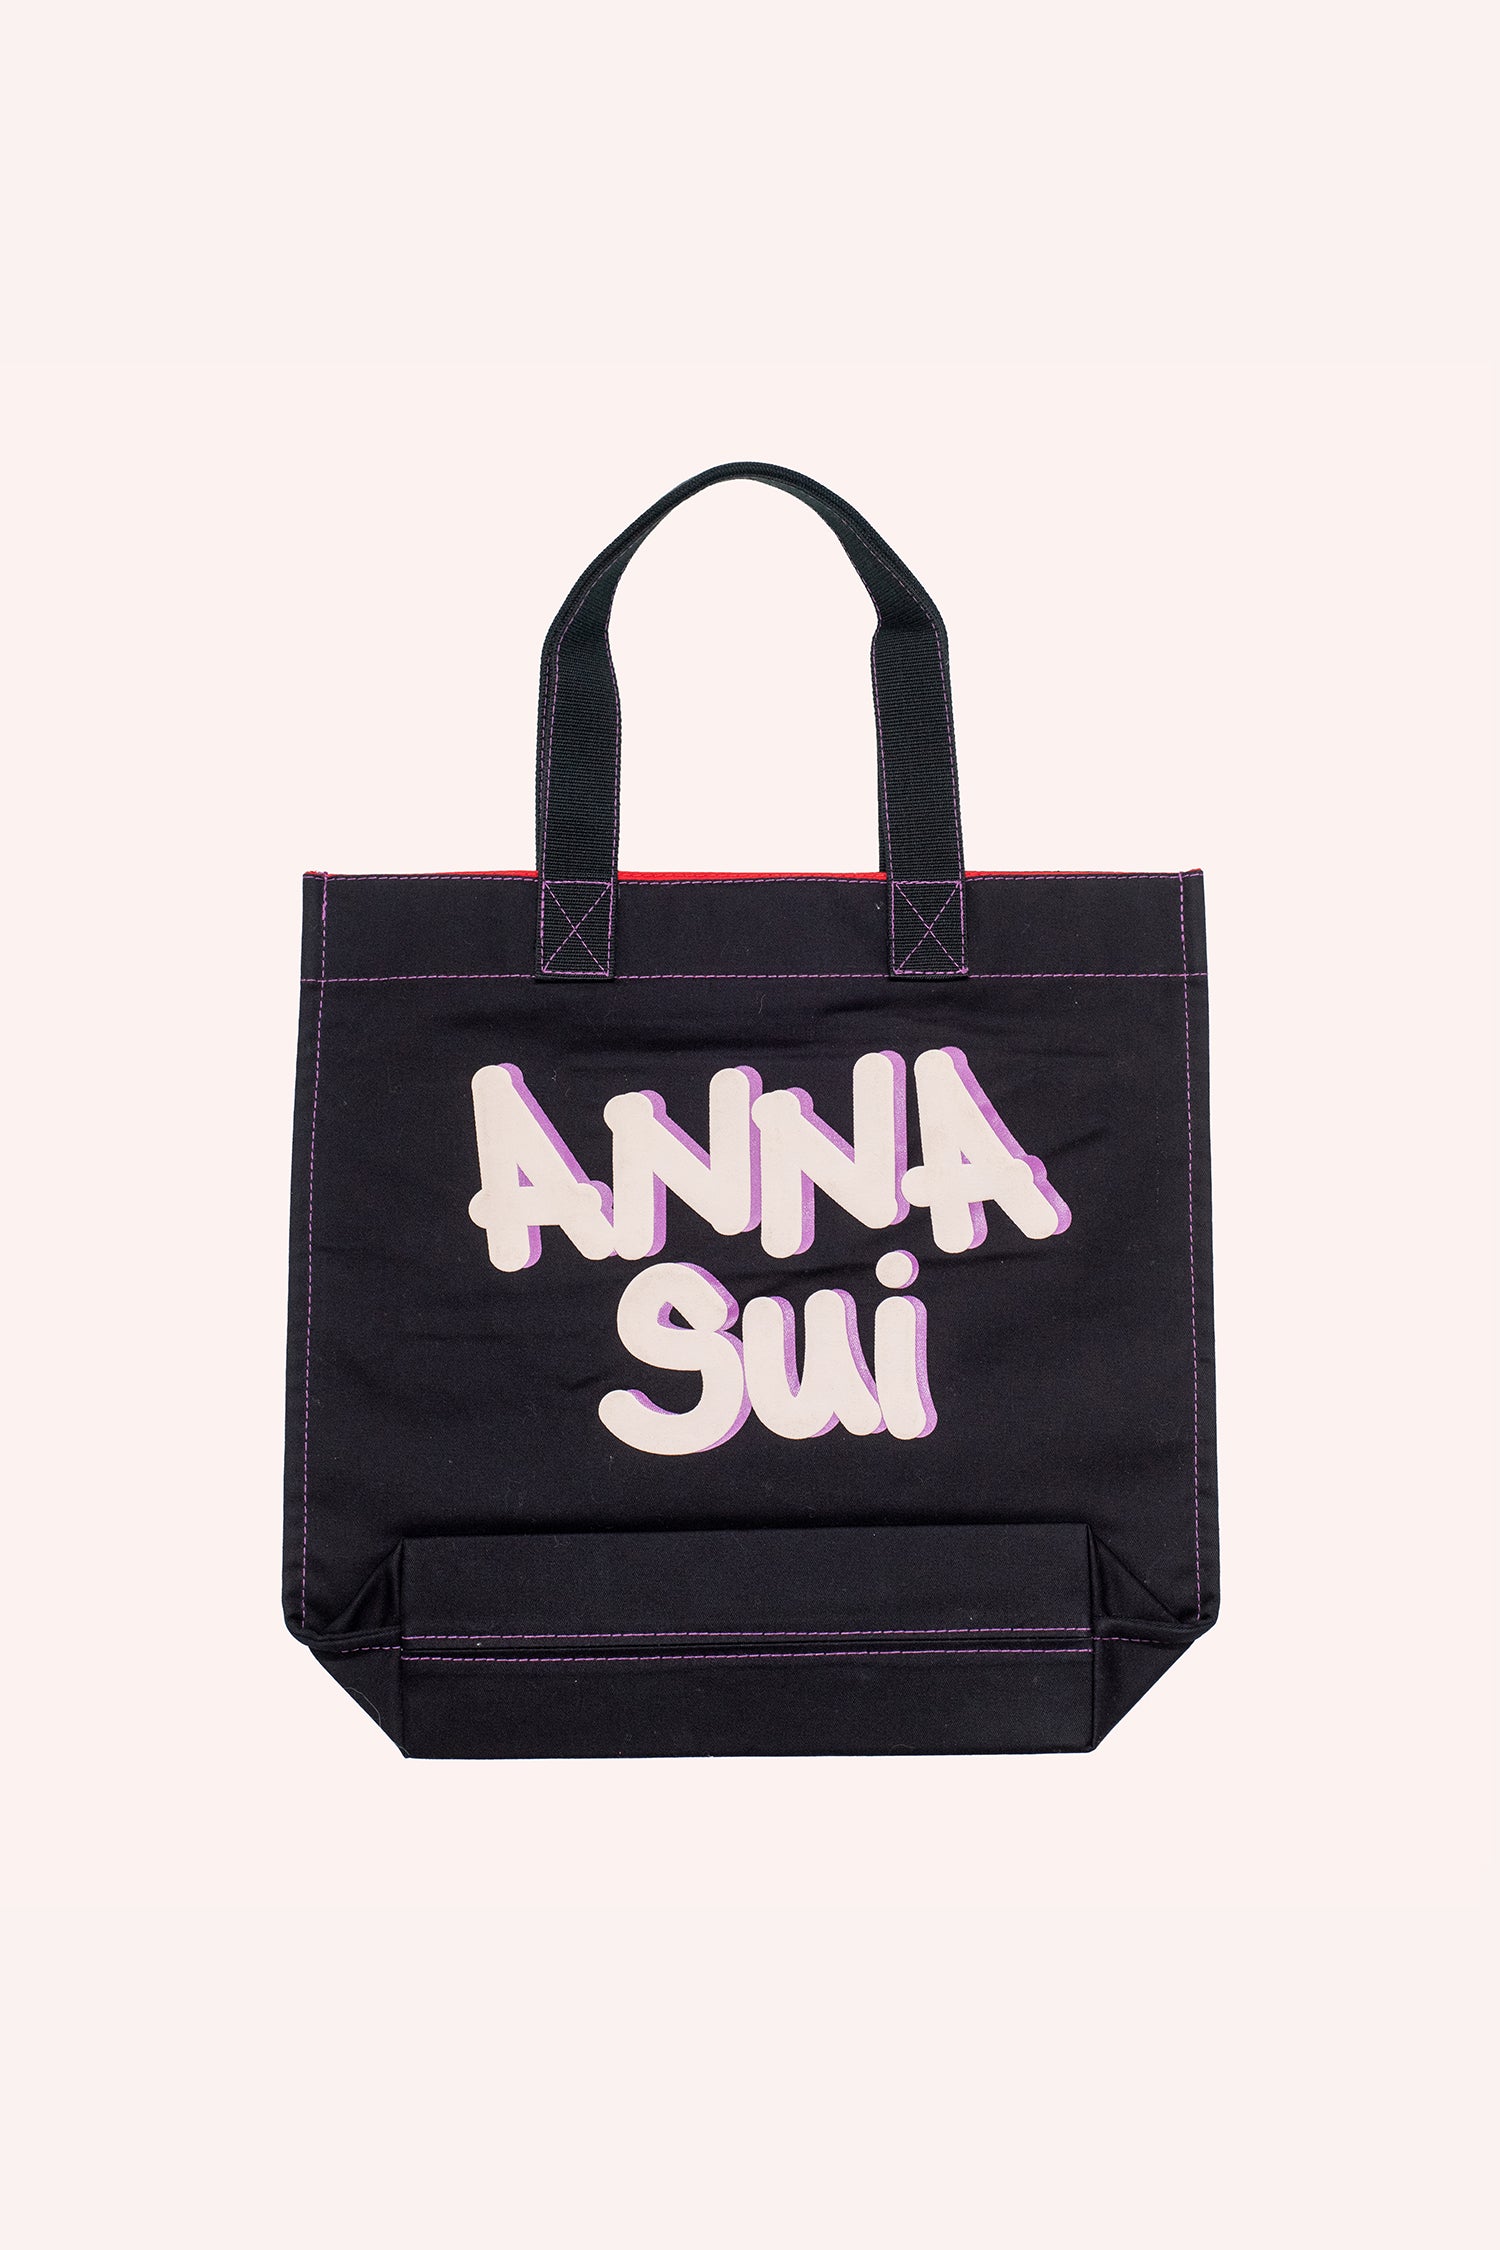 Tote bag, black squared shape, Anna Sui branding on the other side in large font